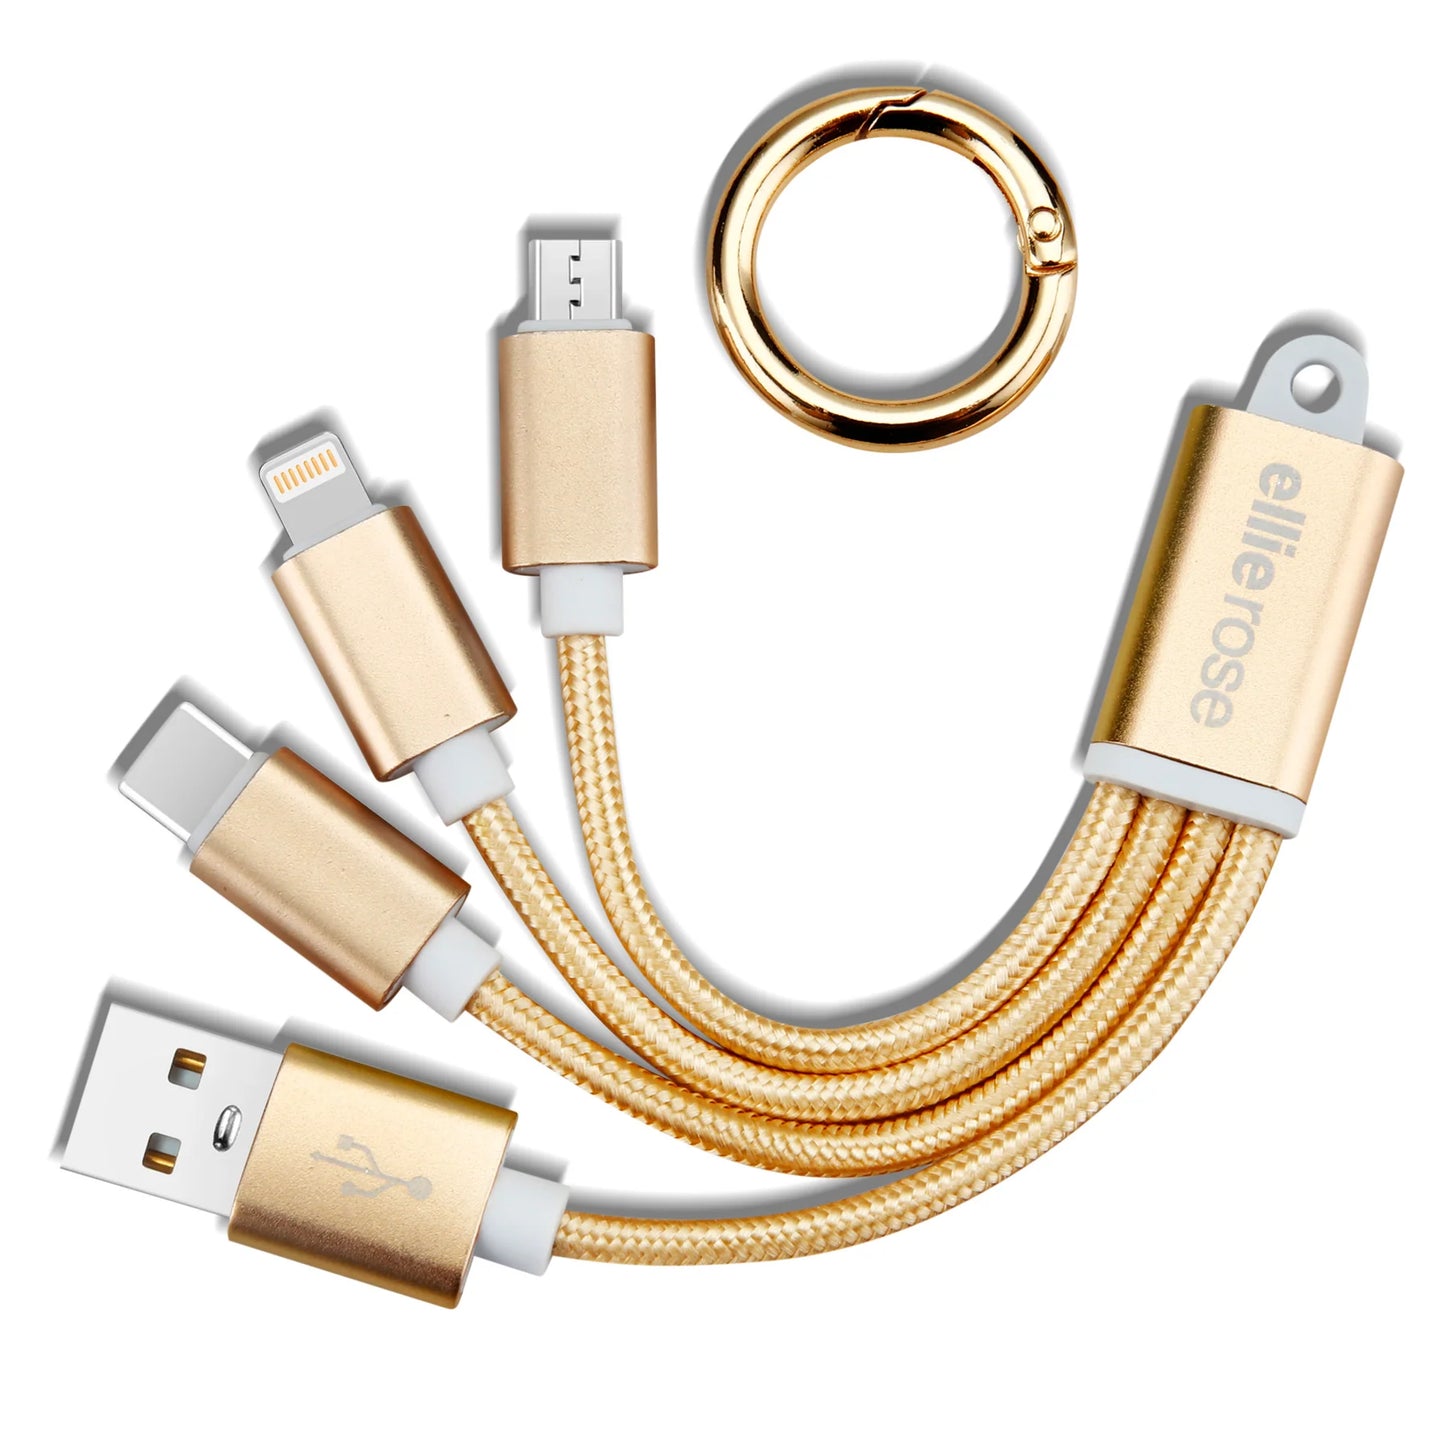 3-in-1 Charging Cable Keychain